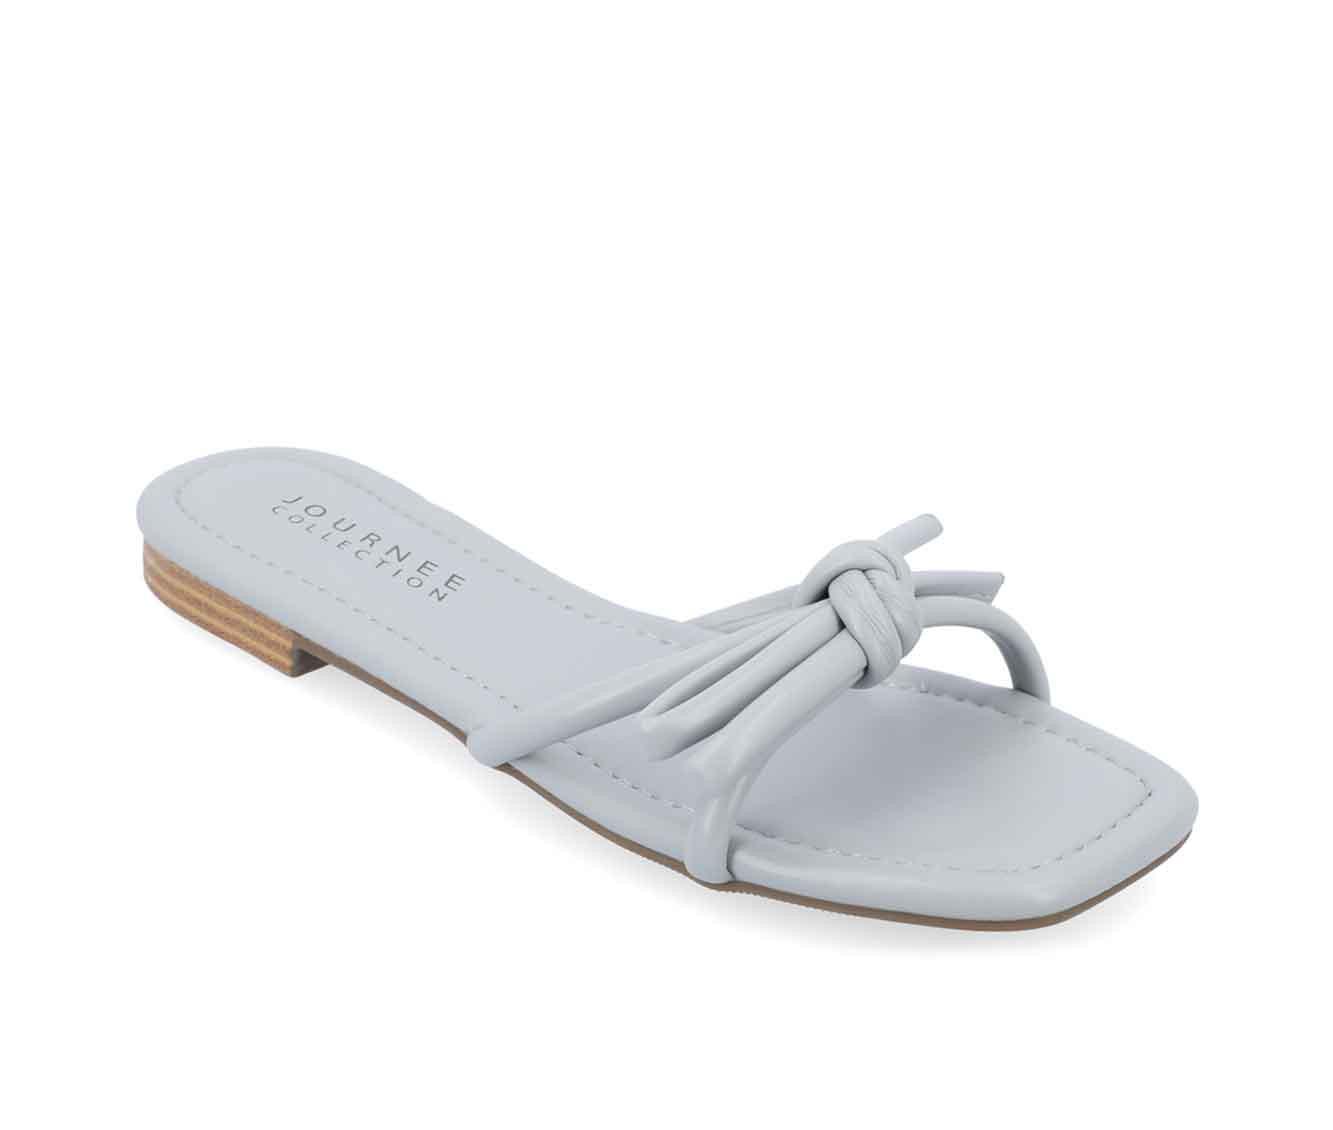 Women's Journee Collection Soma Sandals